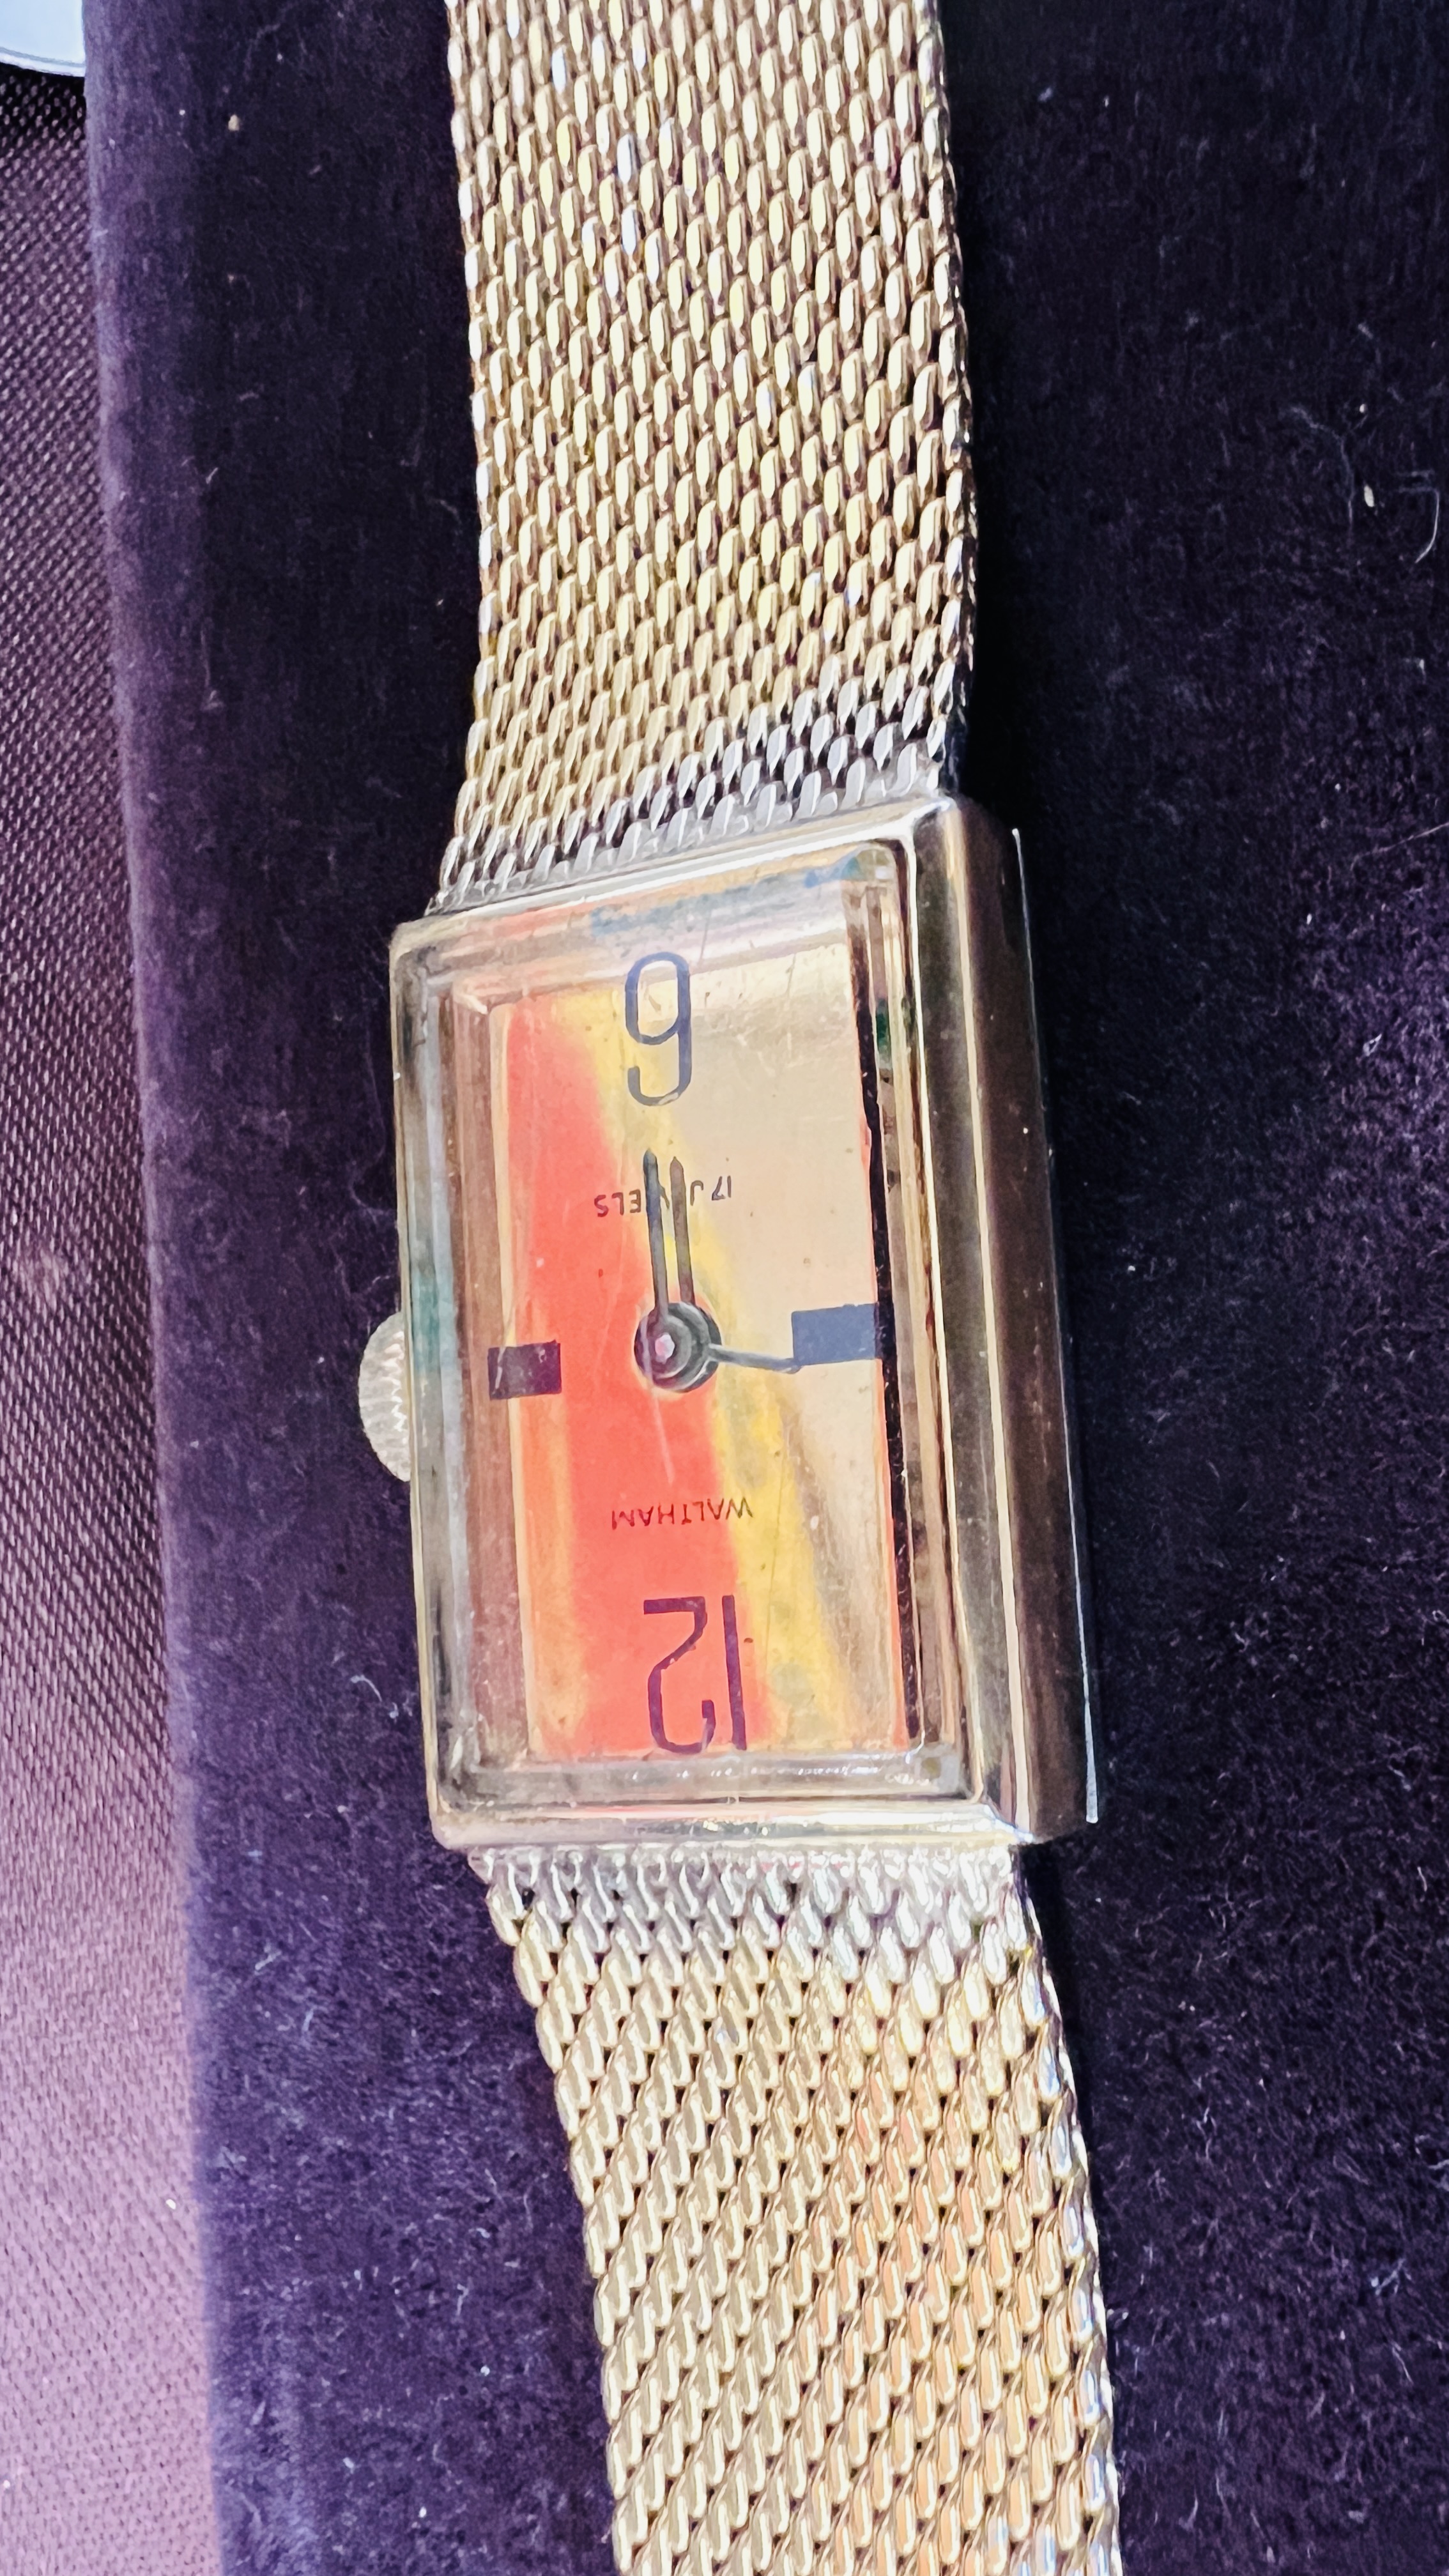 A VINTAGE GENT'S WRIST WATCH MARKED "WALTHAM" IN ORIGINAL BOX WITH WATCH OWNERS GUIDE. - Image 3 of 6